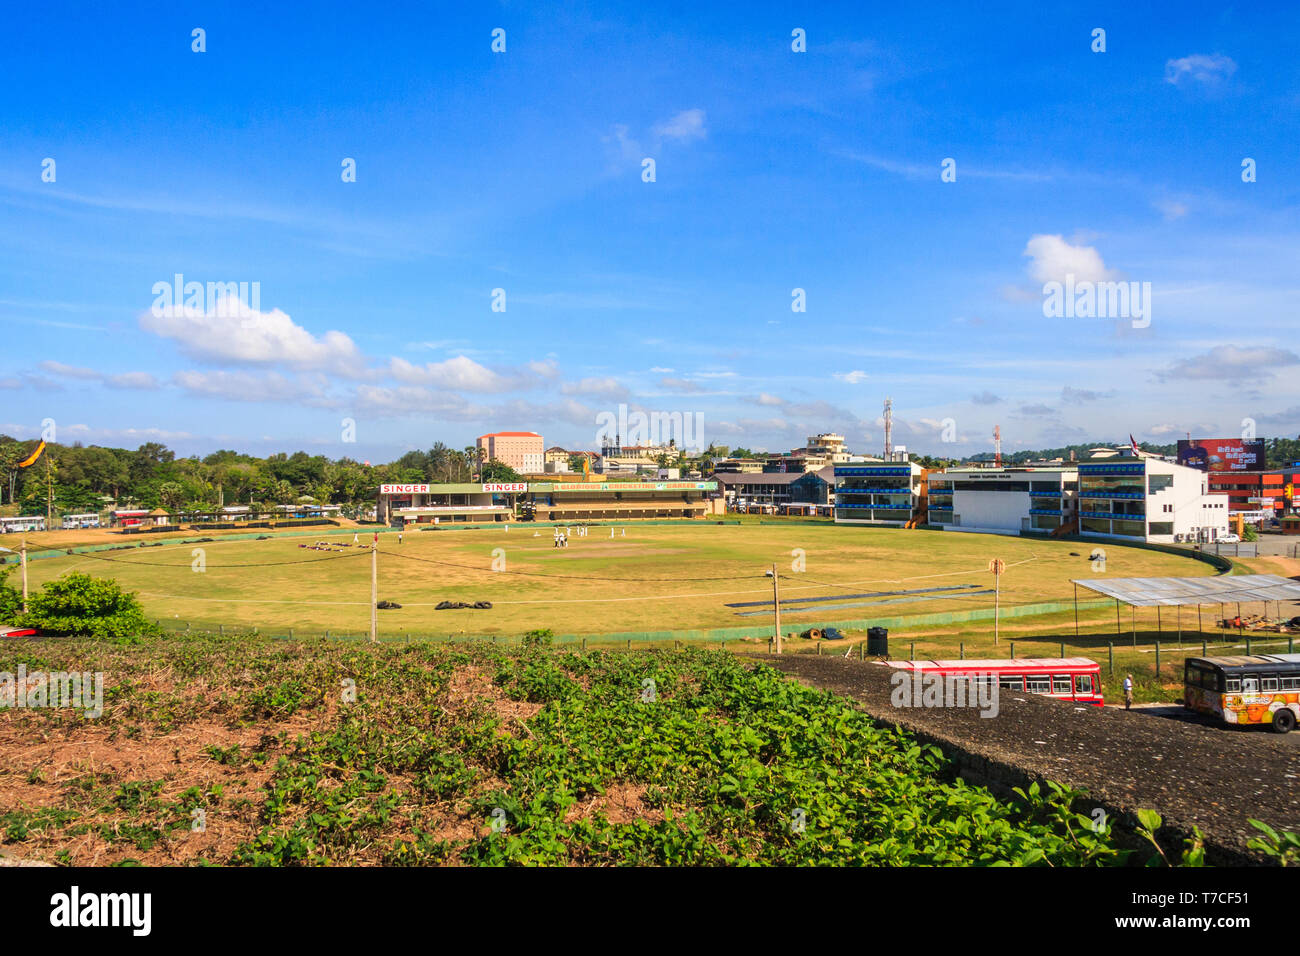 Galle, Sri Lanka - March 14th 2011: A cricket match in progress at Galle cricket ground. The venue is used for test matches. Stock Photo